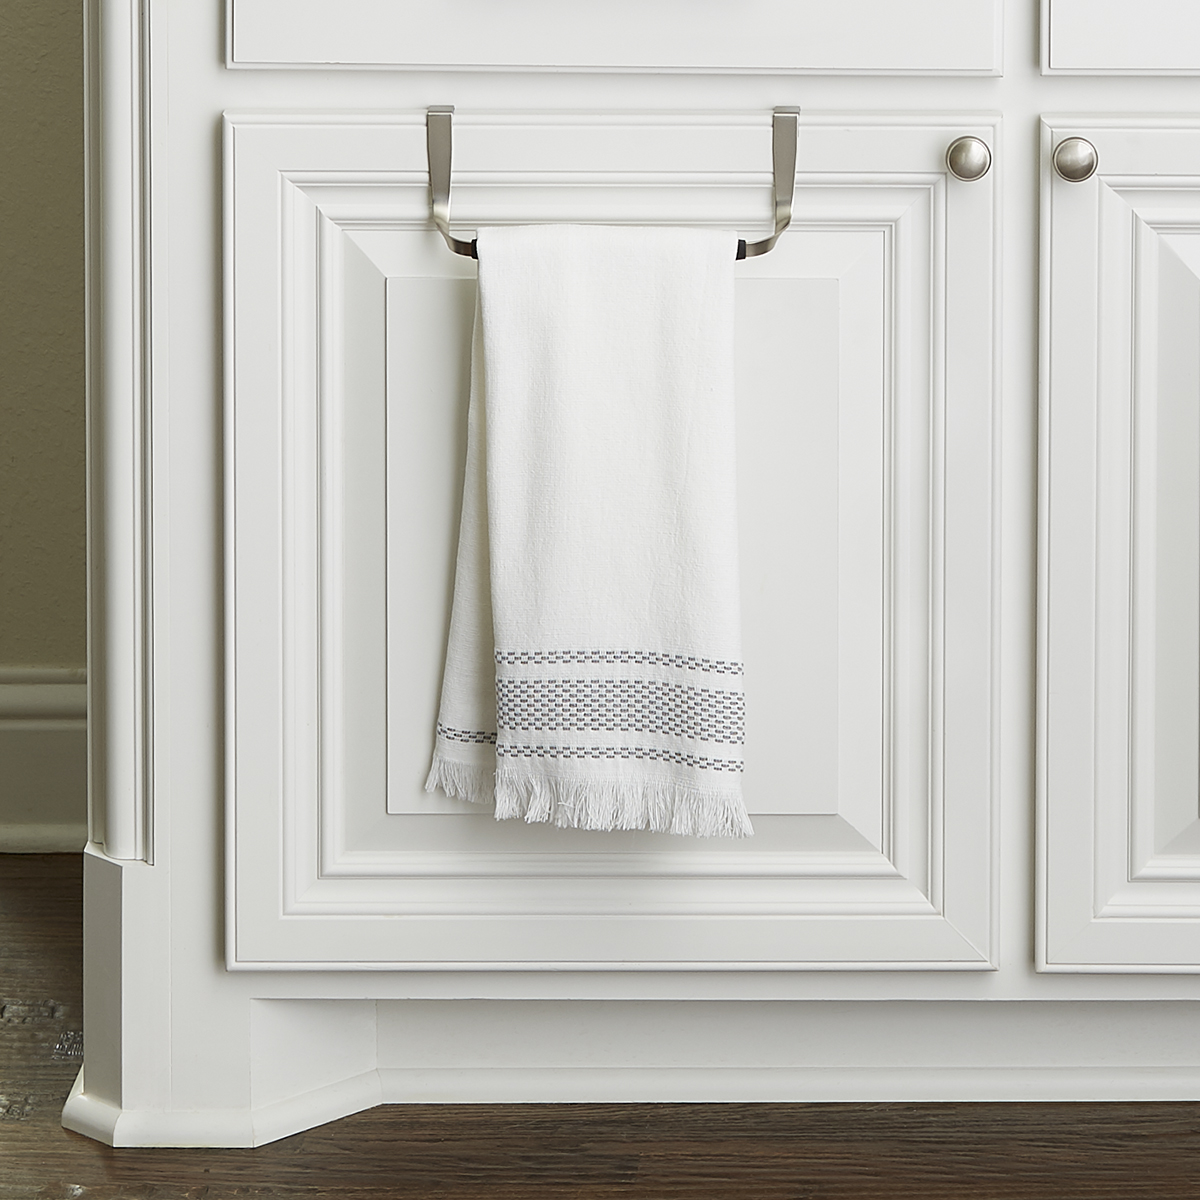 Umbra Schnook Over the Cabinet Towel Bar | The Container Store